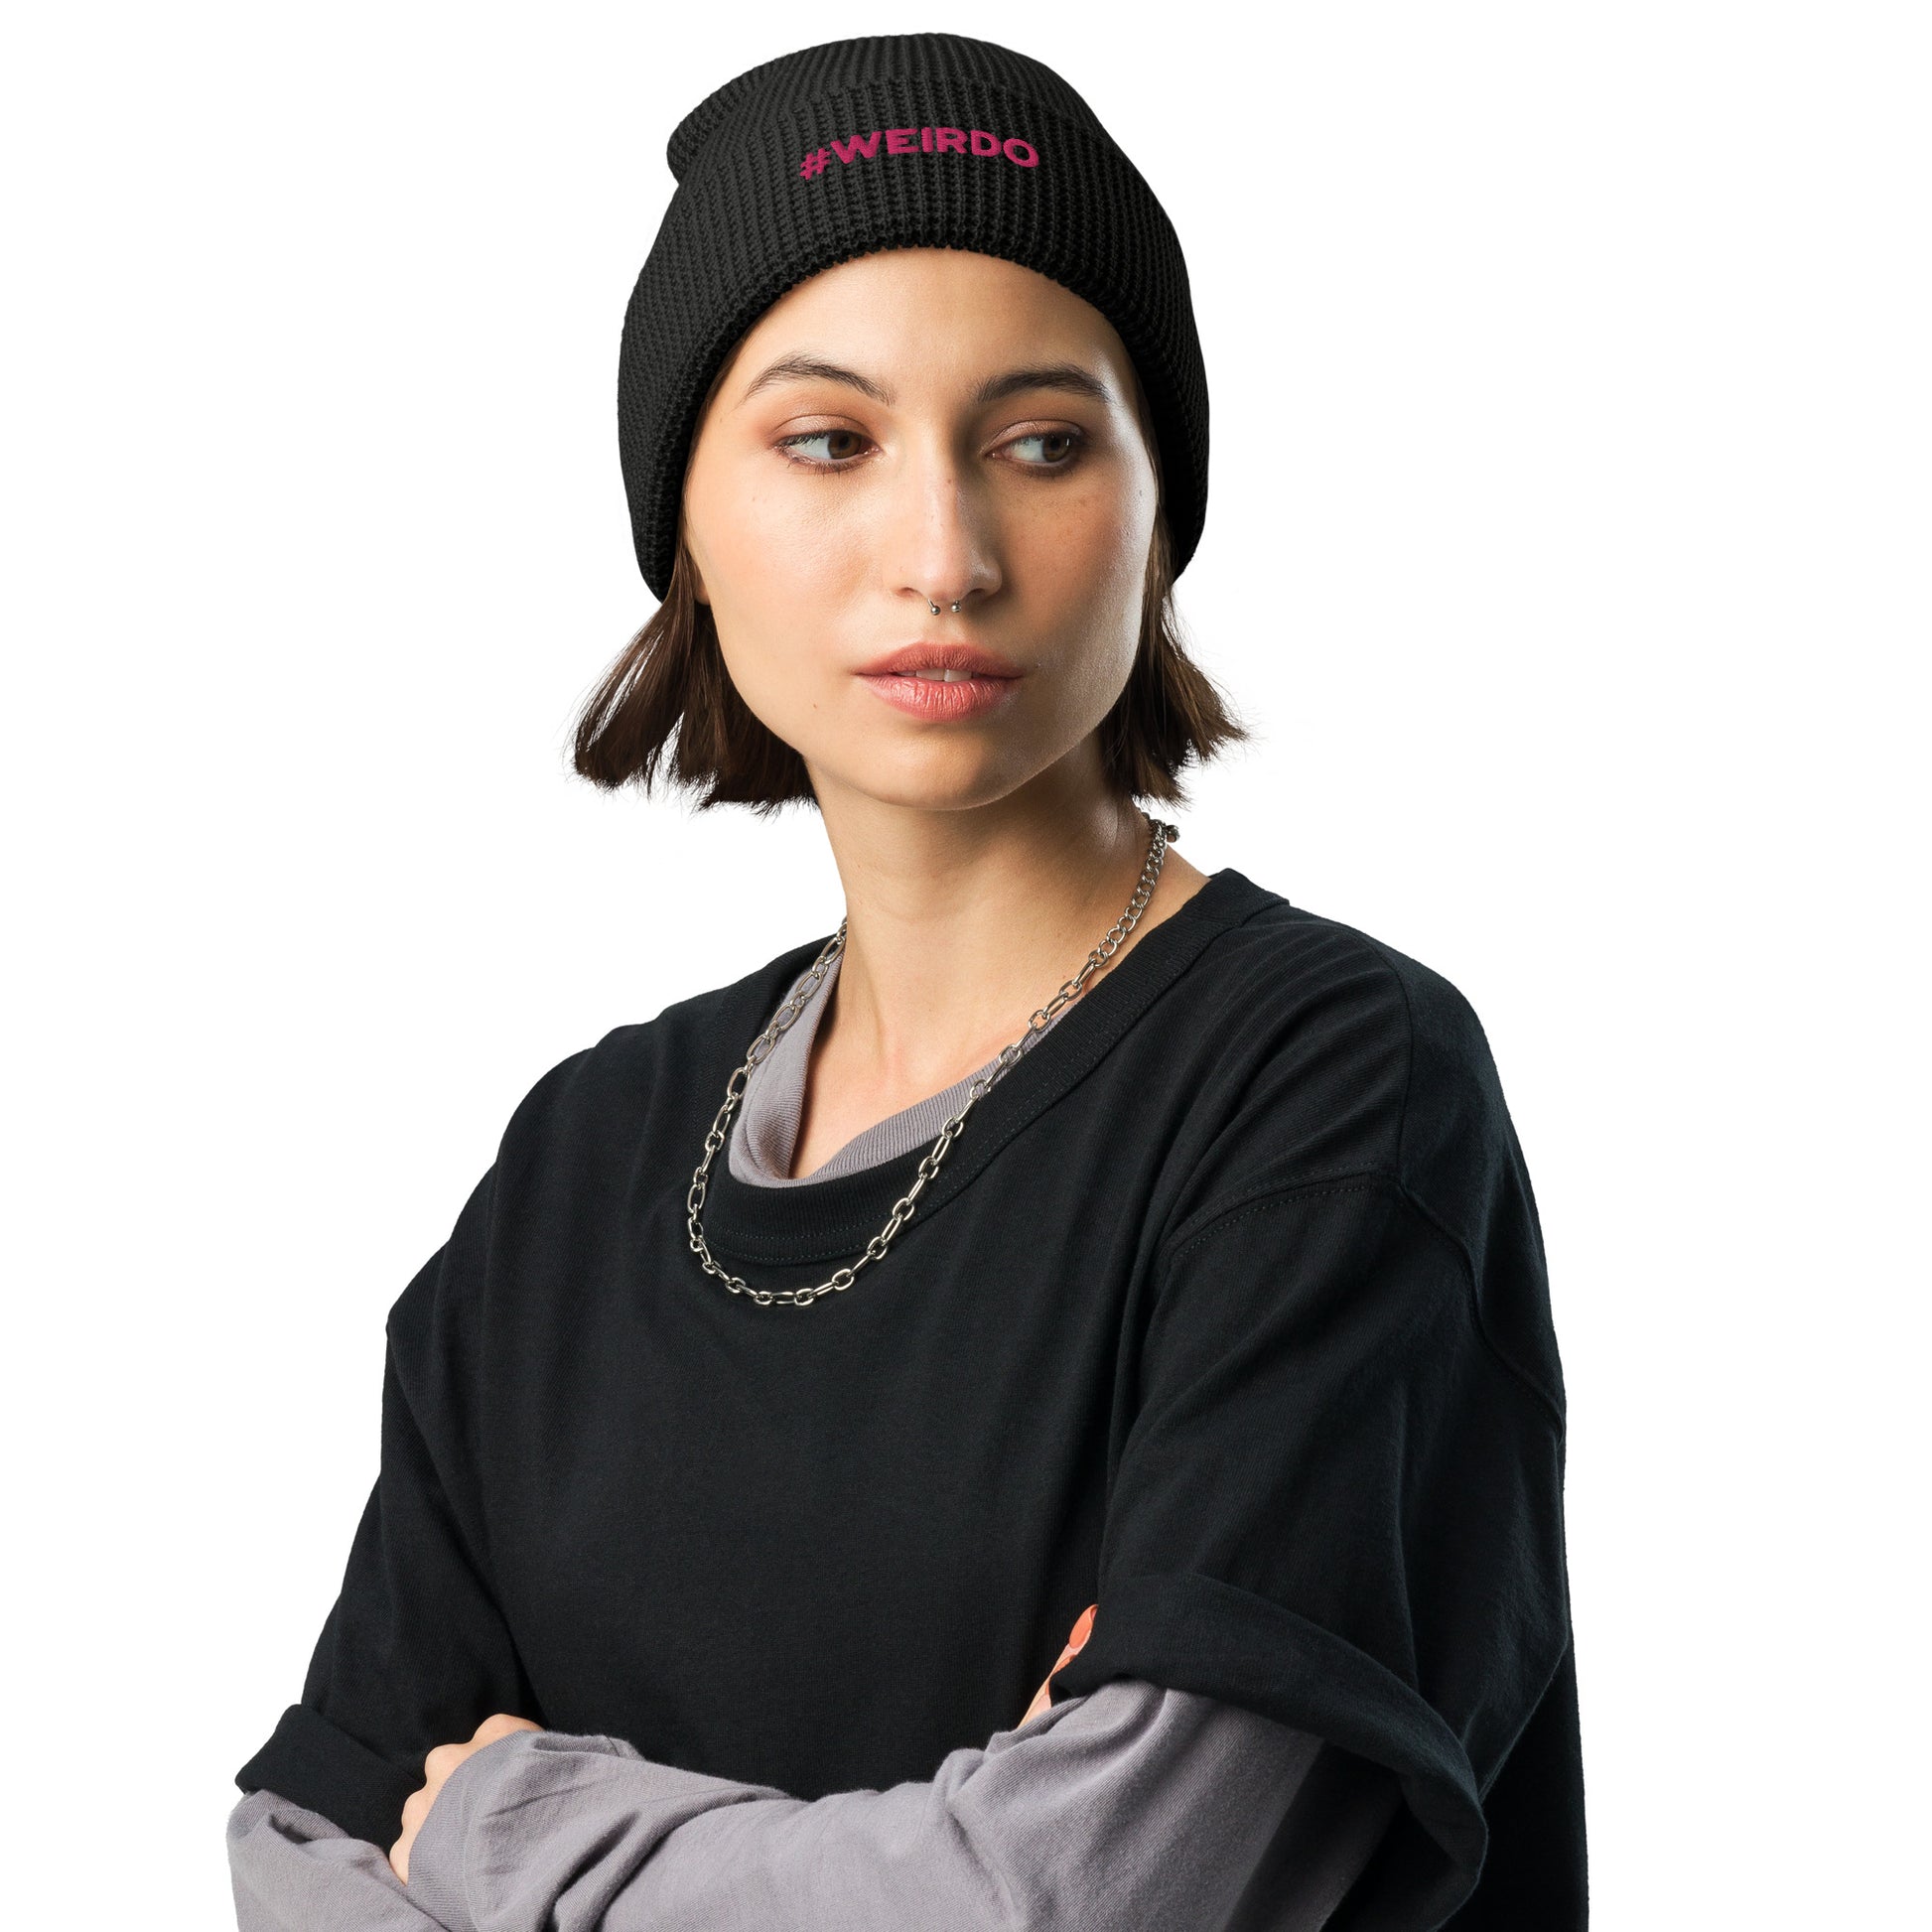 #WEIRDO | Funny beanies for funny and weird people! This waffle knit beanie hat has the #WEIRDO meme embroidered at the front of the beanie.